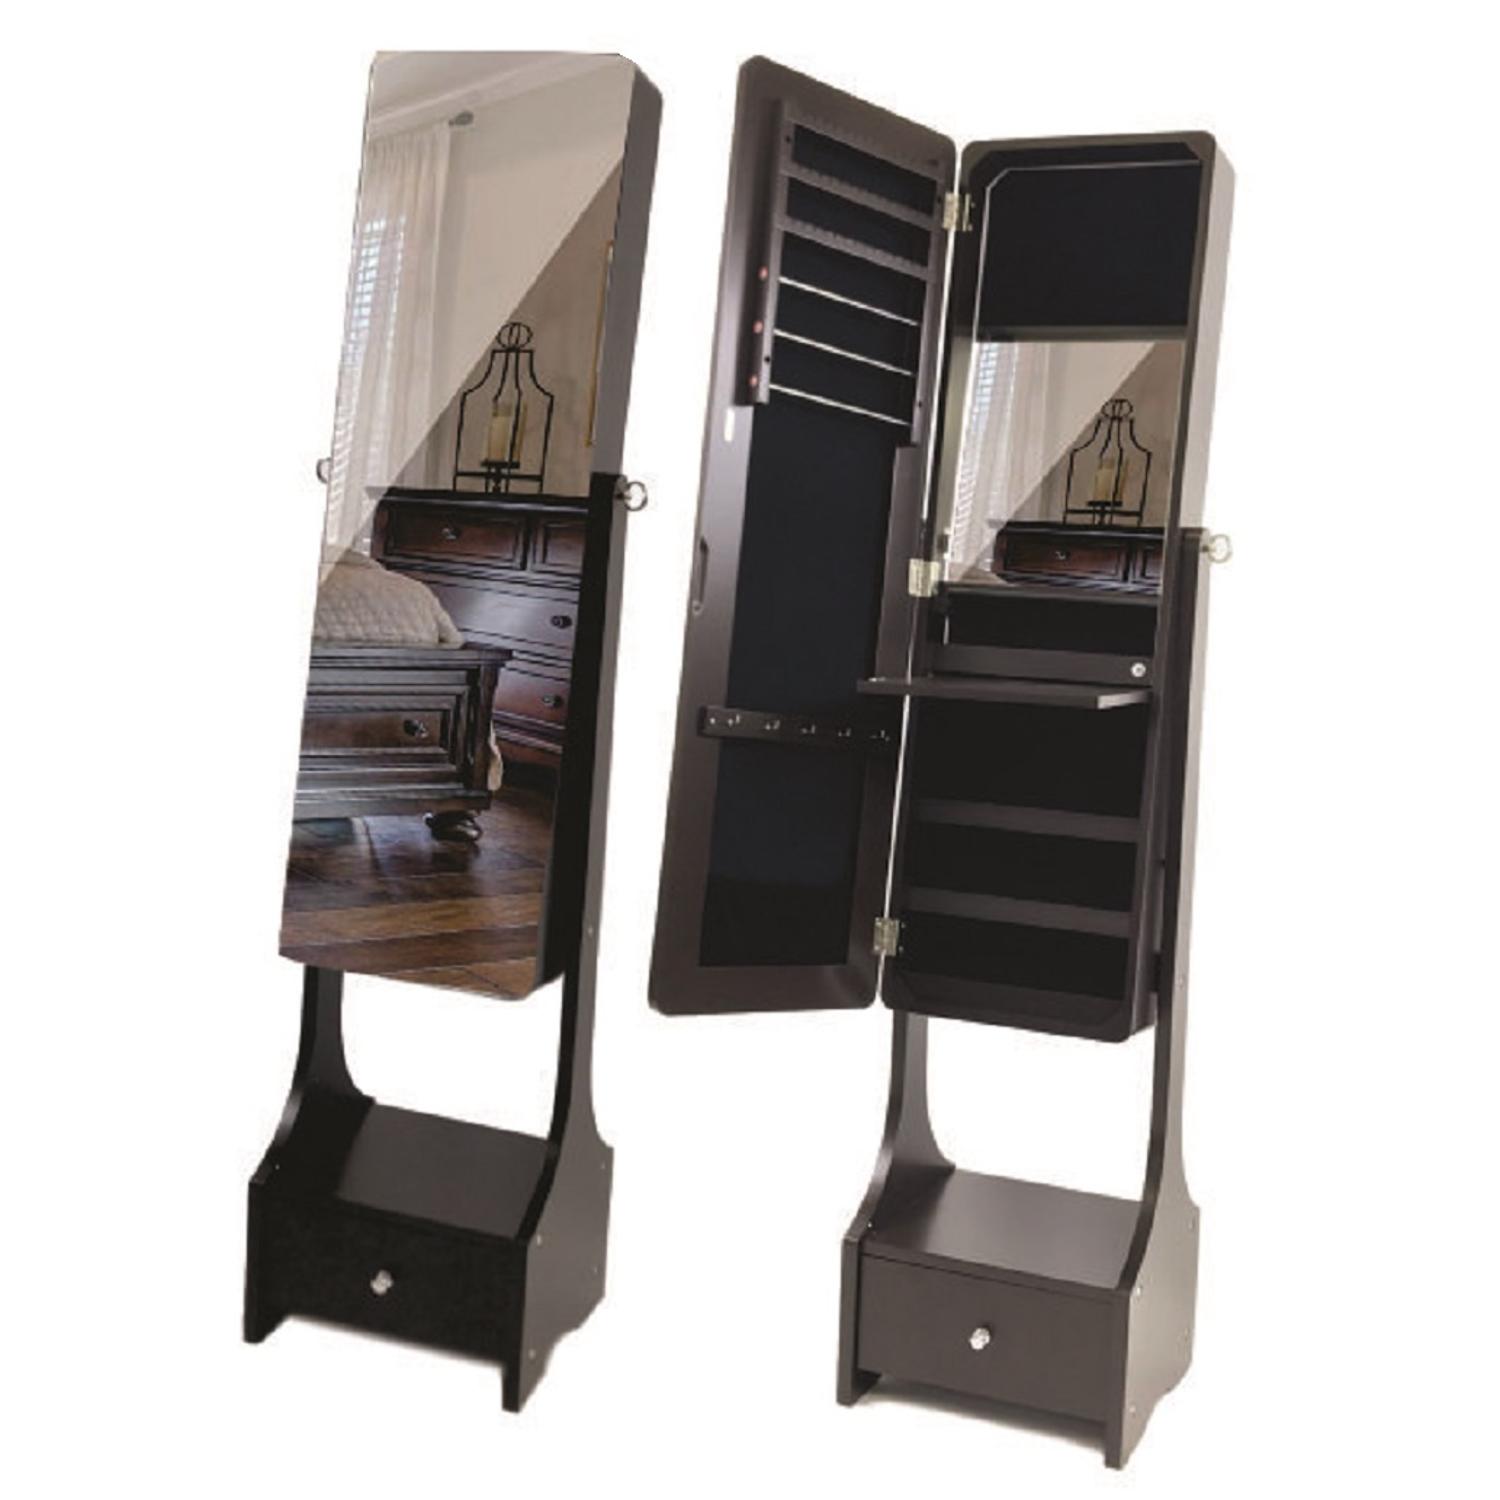 ViscoLogic Brooks Mirrored Jewelry Cabinet Armoire Stand, Large Drawer Base with LED Lights (Brown)